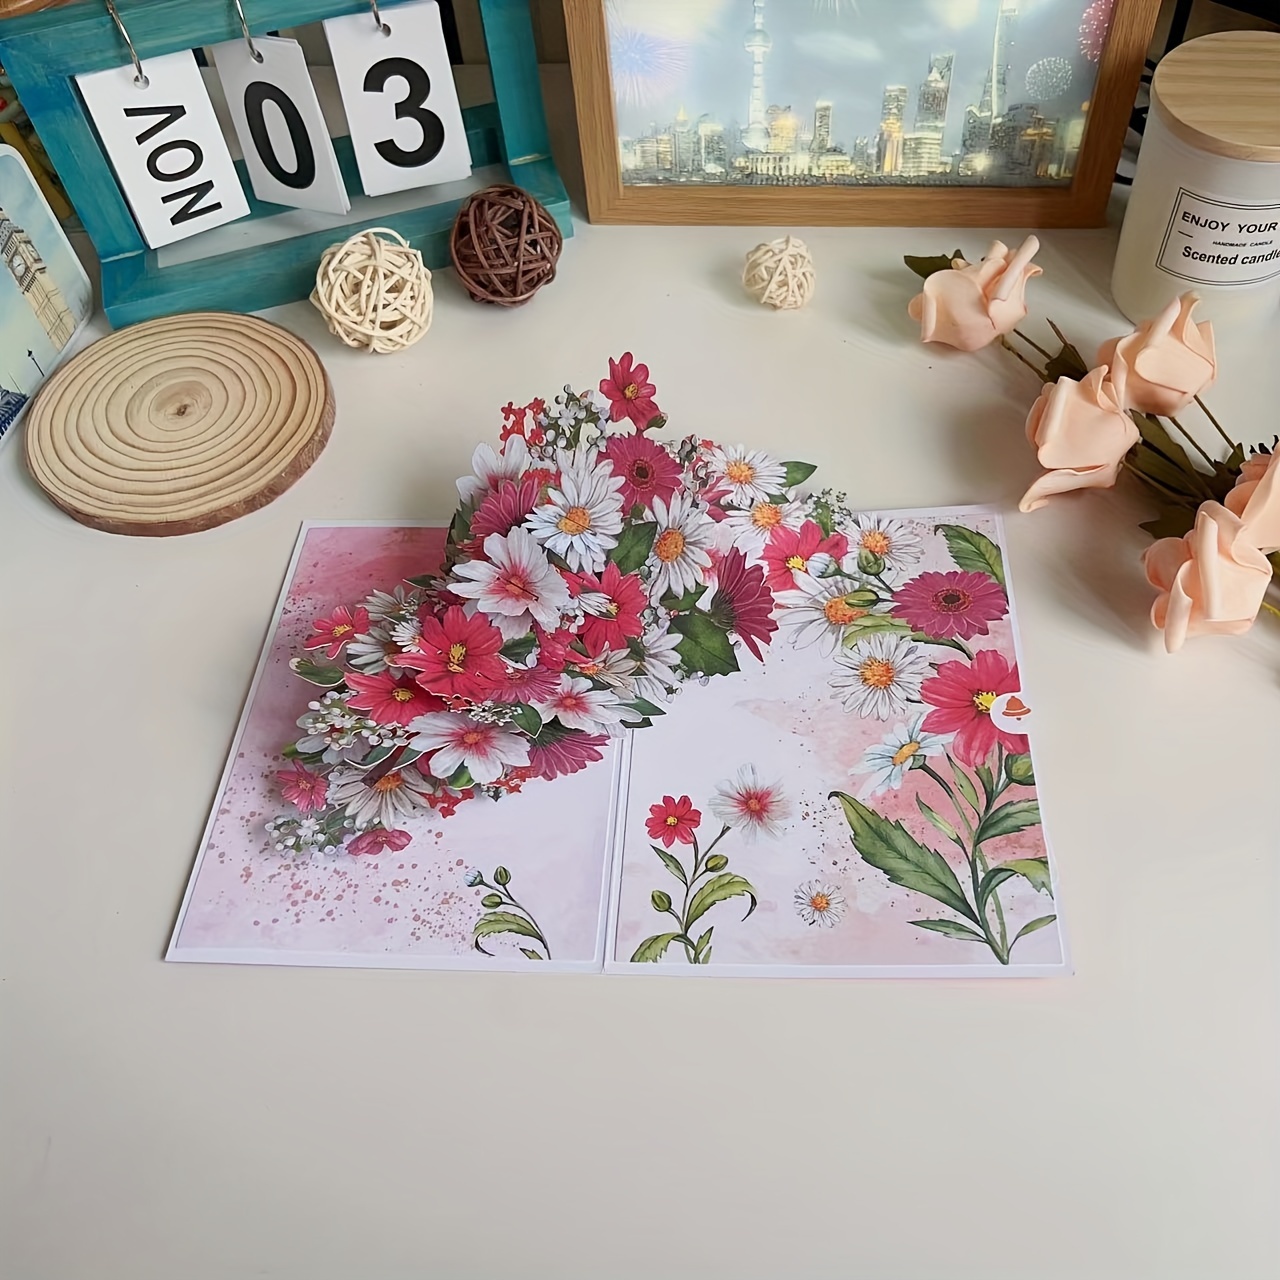 

3d Pop-up Card With Joyful Flower Design - Perfect For Mother's Day, Birthdays, Anniversaries, And Sending Blessings & Notes - Includes Card And Envelope